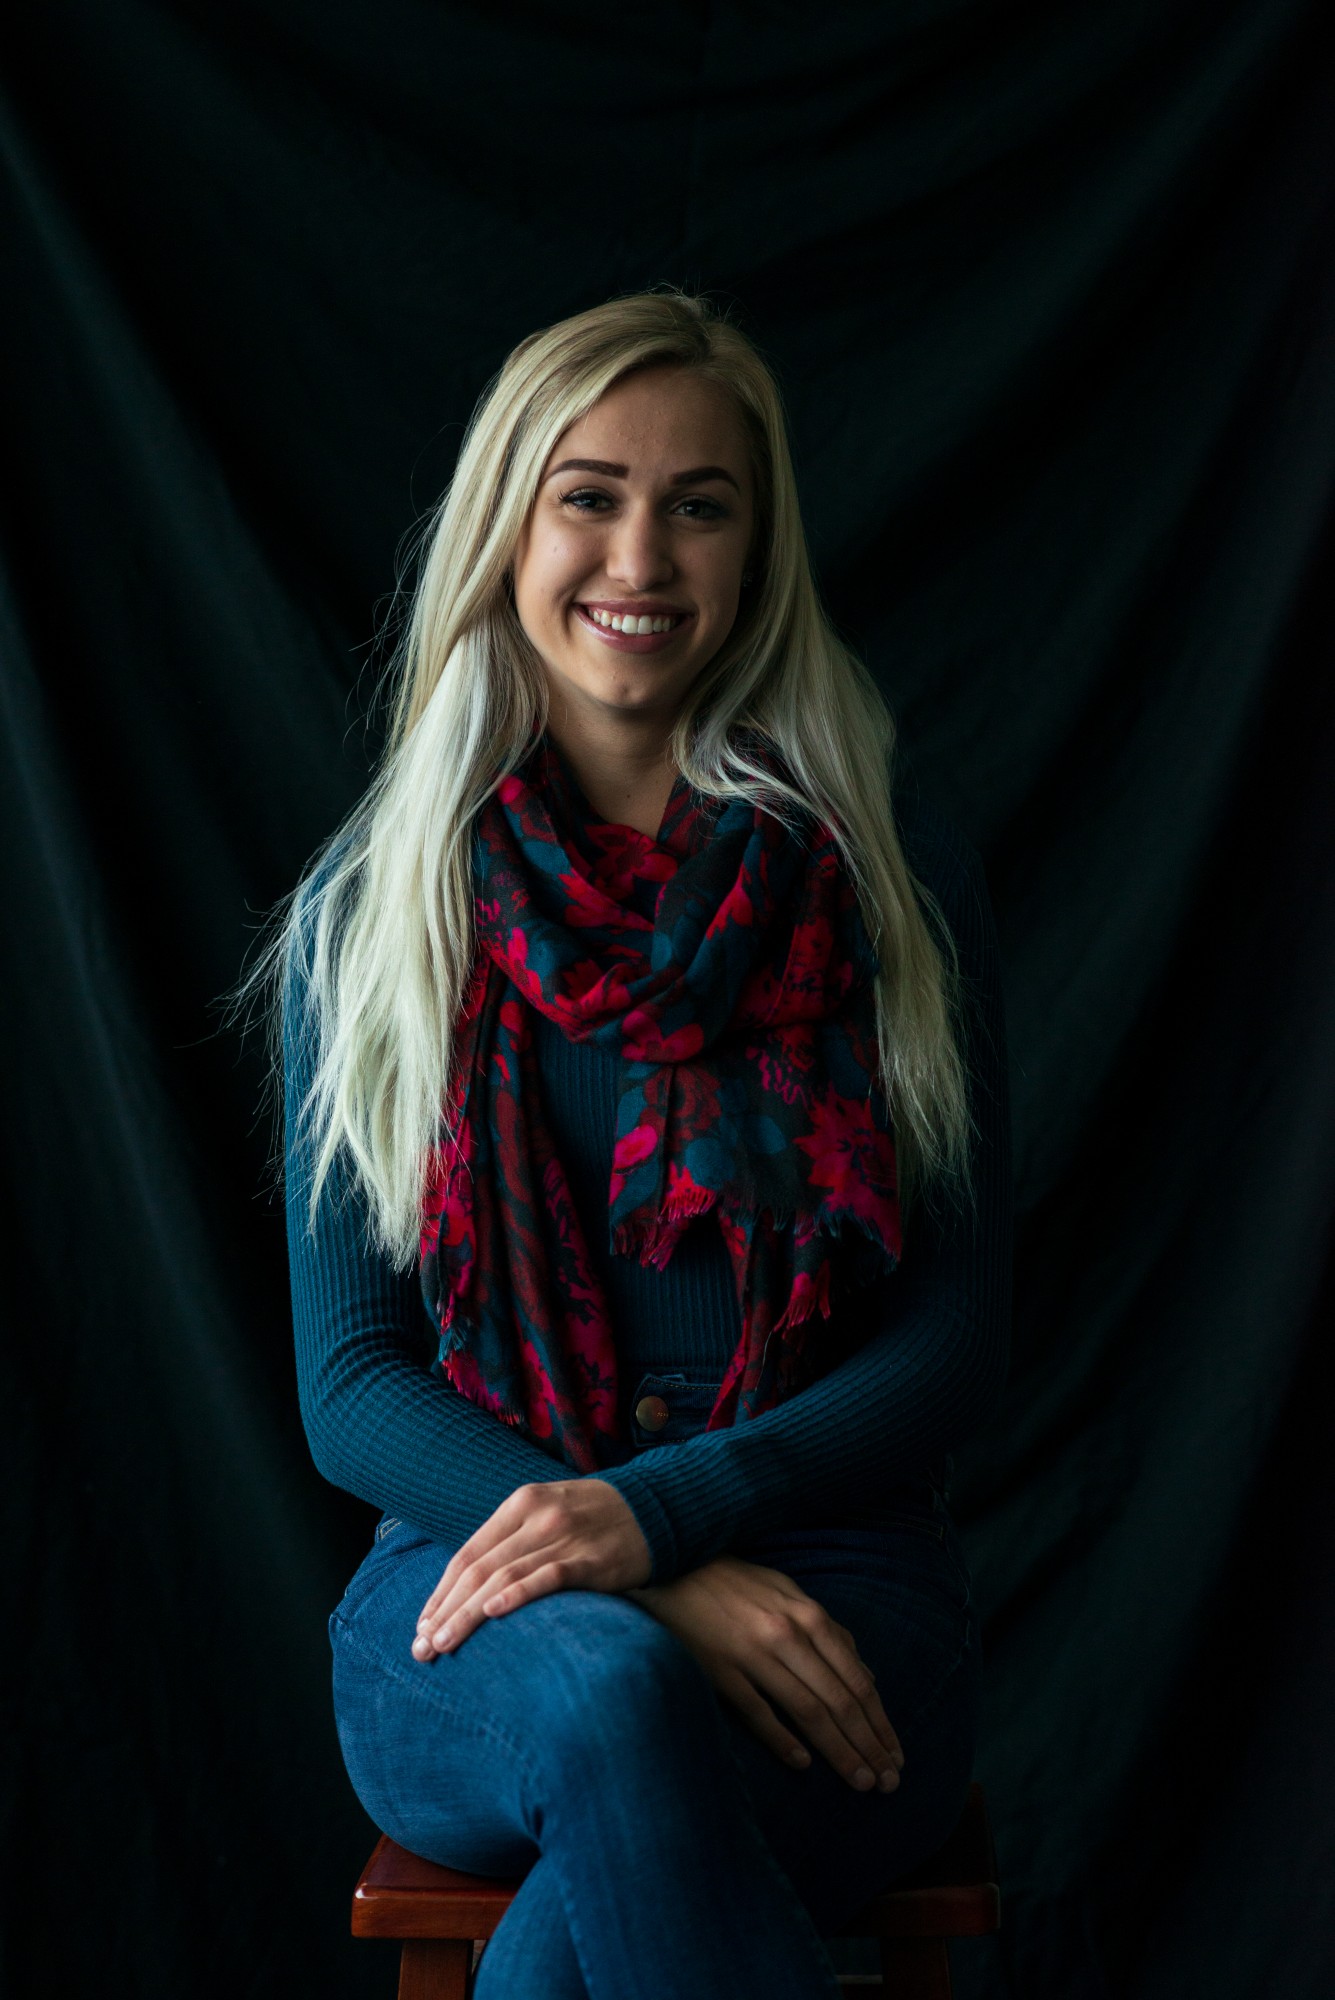 Senior Megan Olson poses for a portrait at the Minnesota Daily office on Thursday, Jan. 23.  If her campaign for Minnesota House Seat 57A is successful, Olson hopes to use her position to give back to the Apple Valley schools to which she credits her academic success.